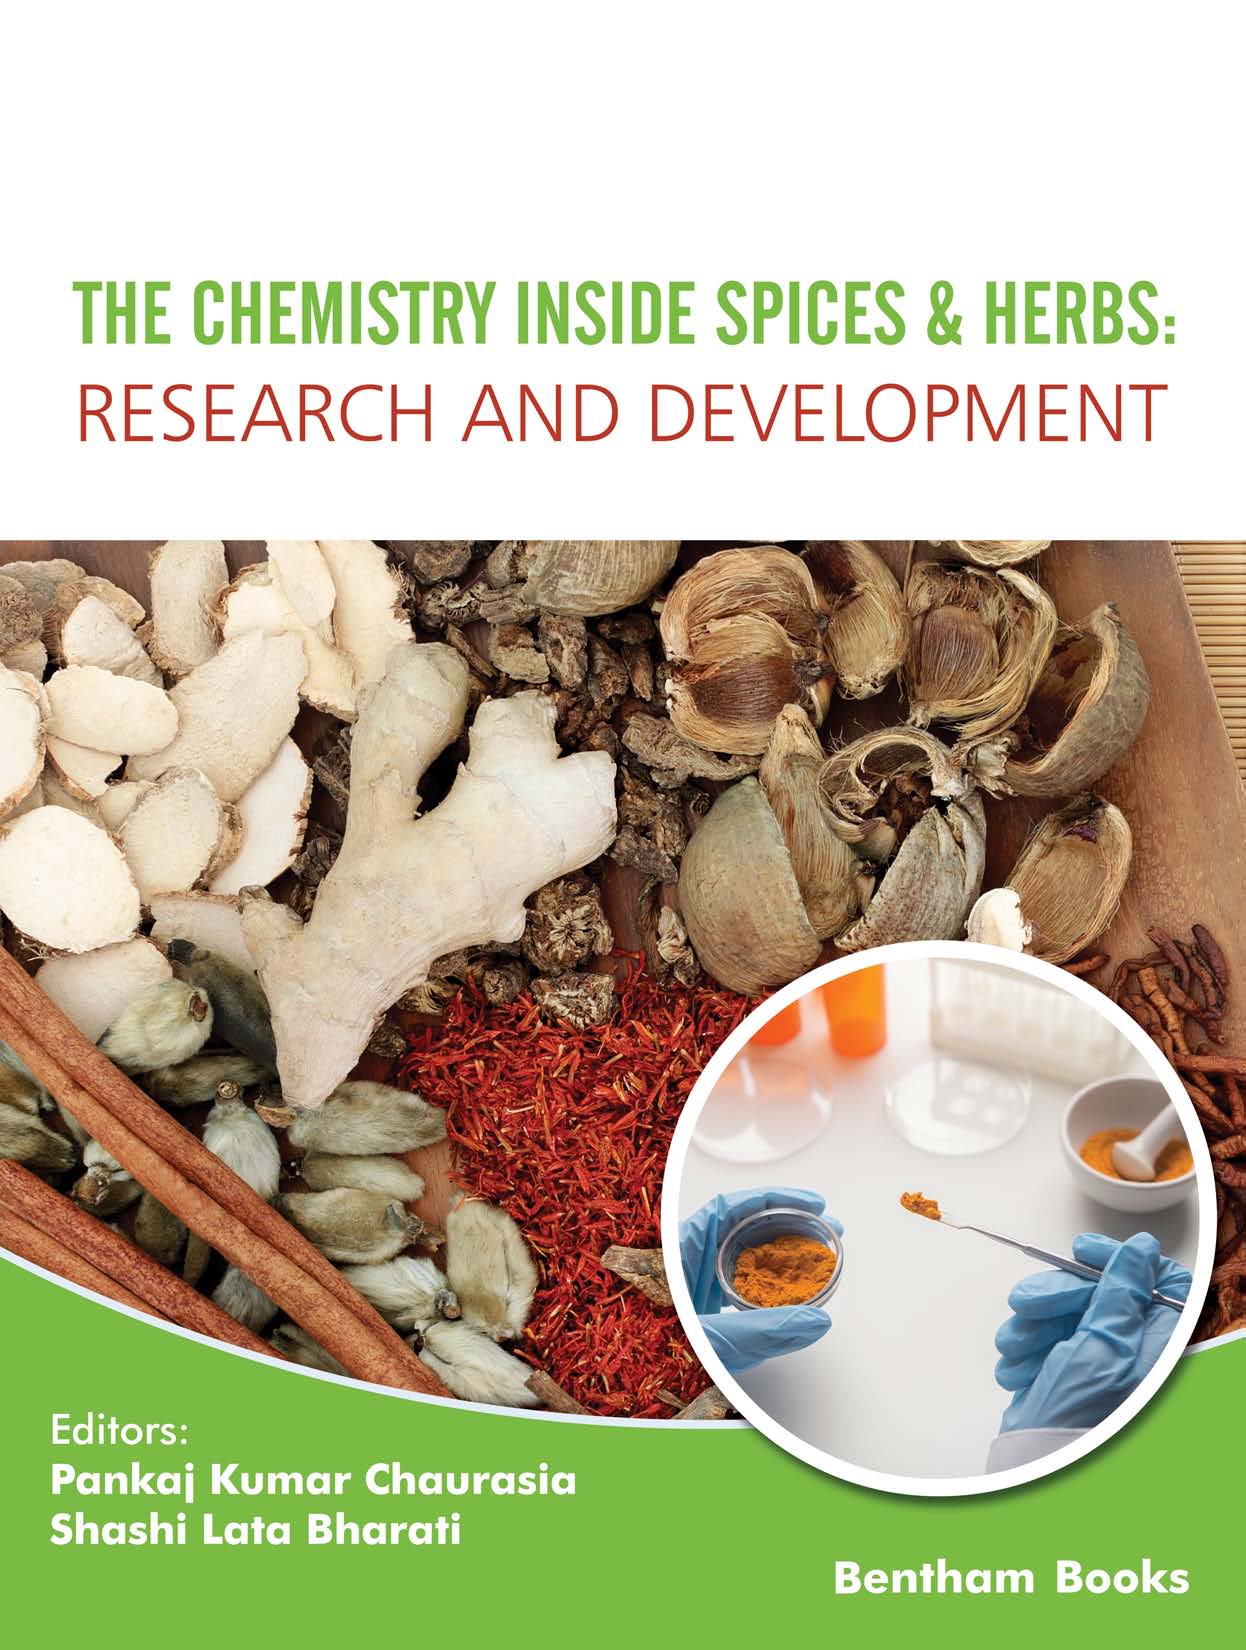 The Chemistry inside Spices & Herbs: Research and Development